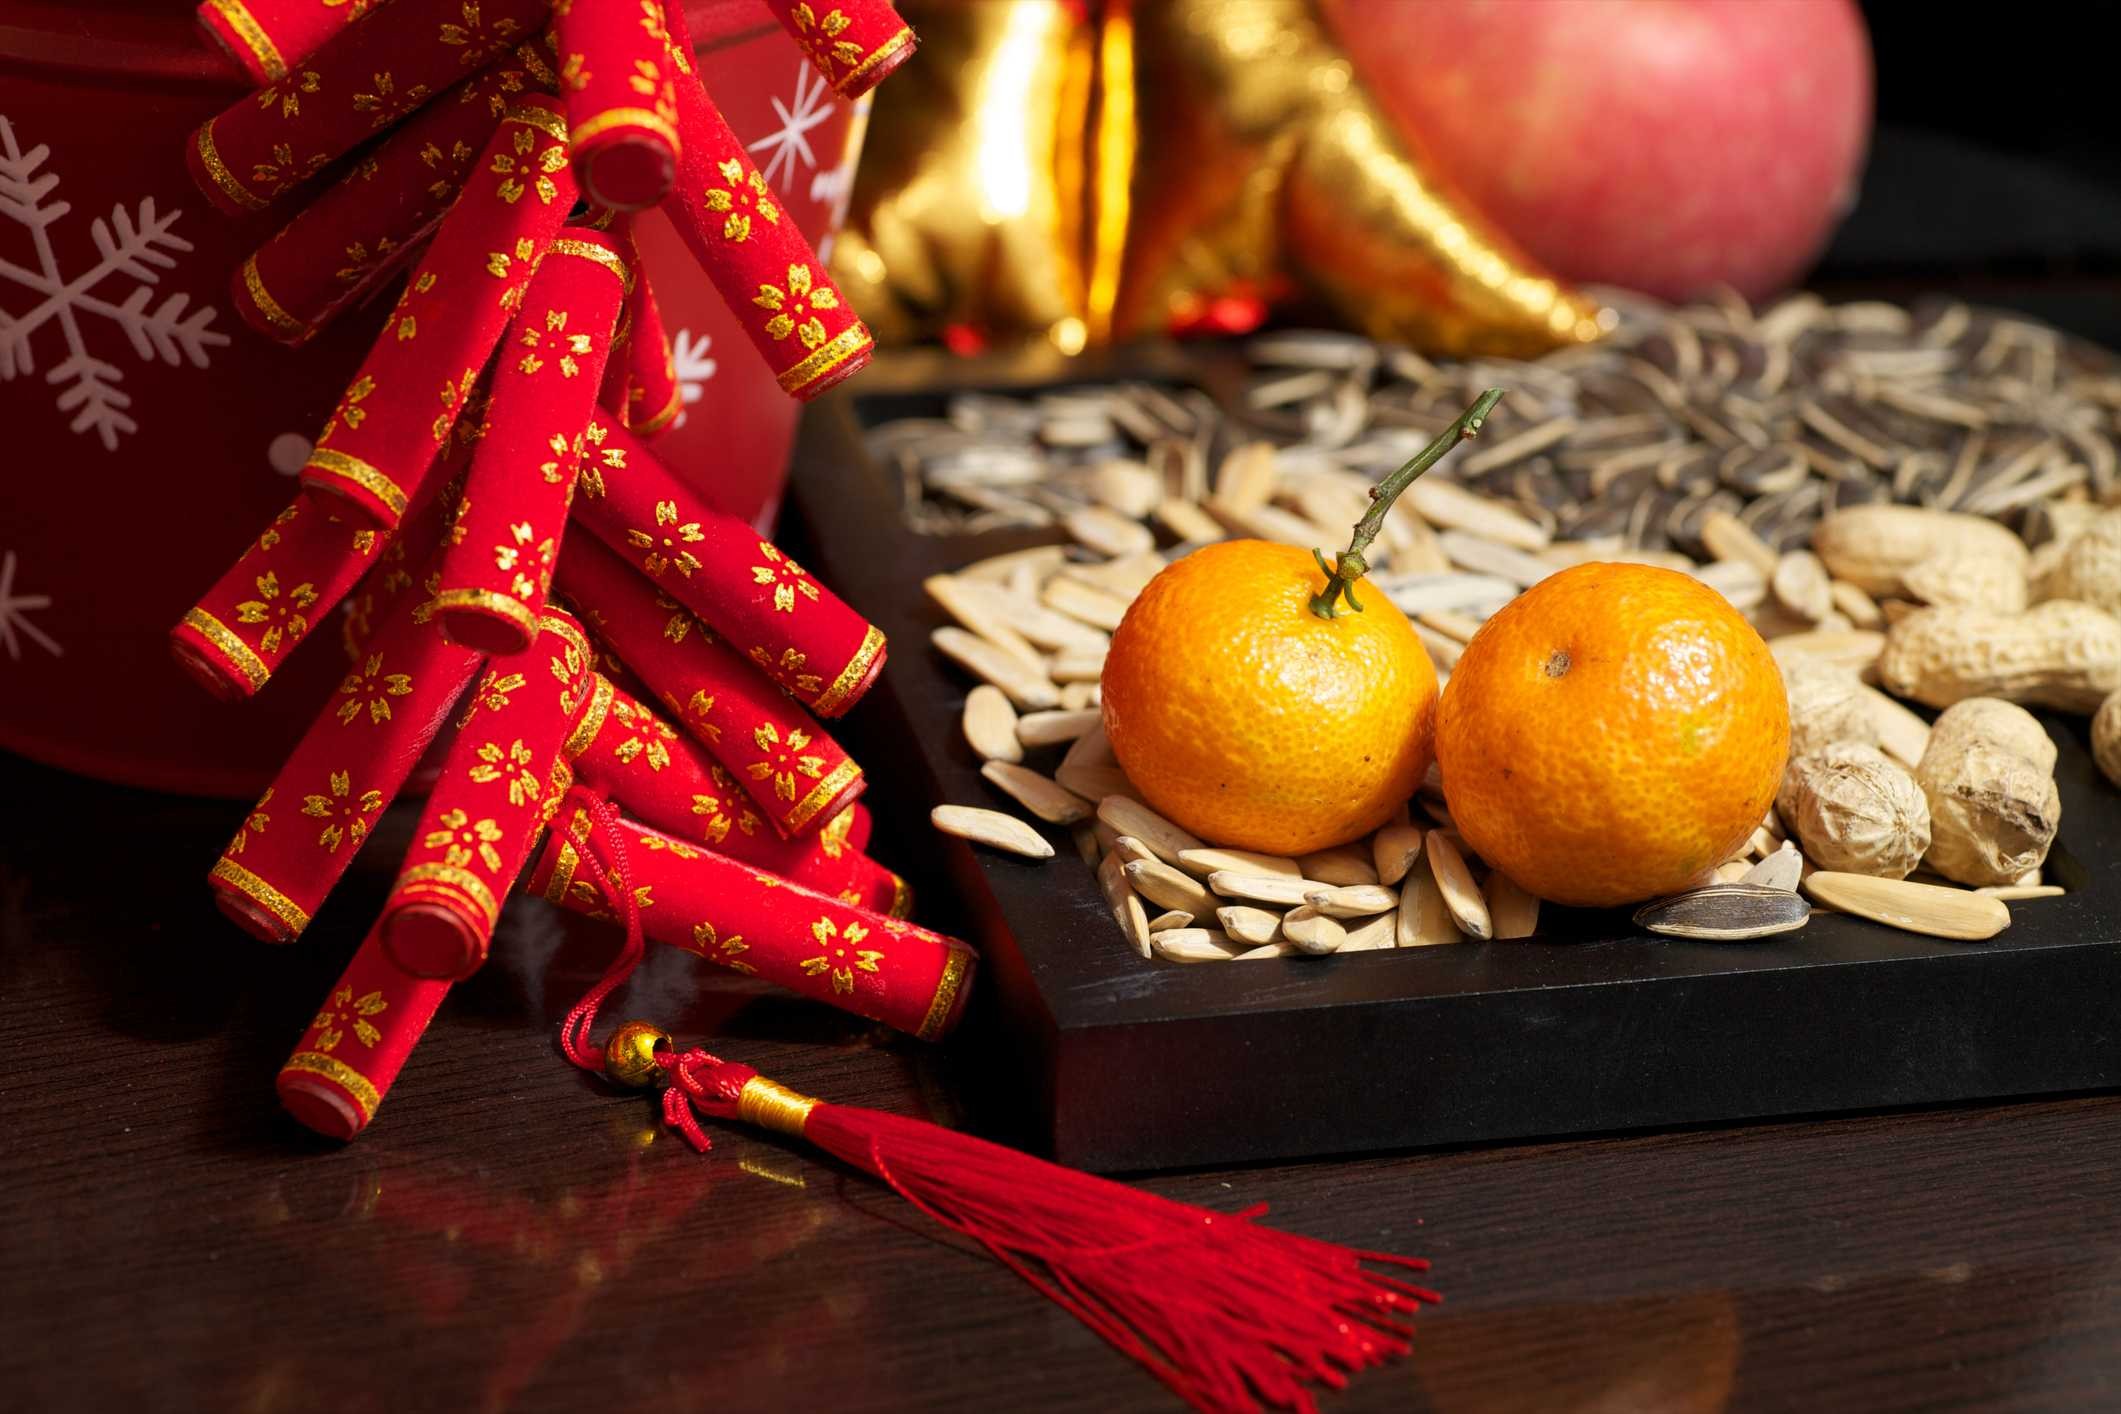 At Lunar New Year, many find themselves eating too much of the wrong types of food.